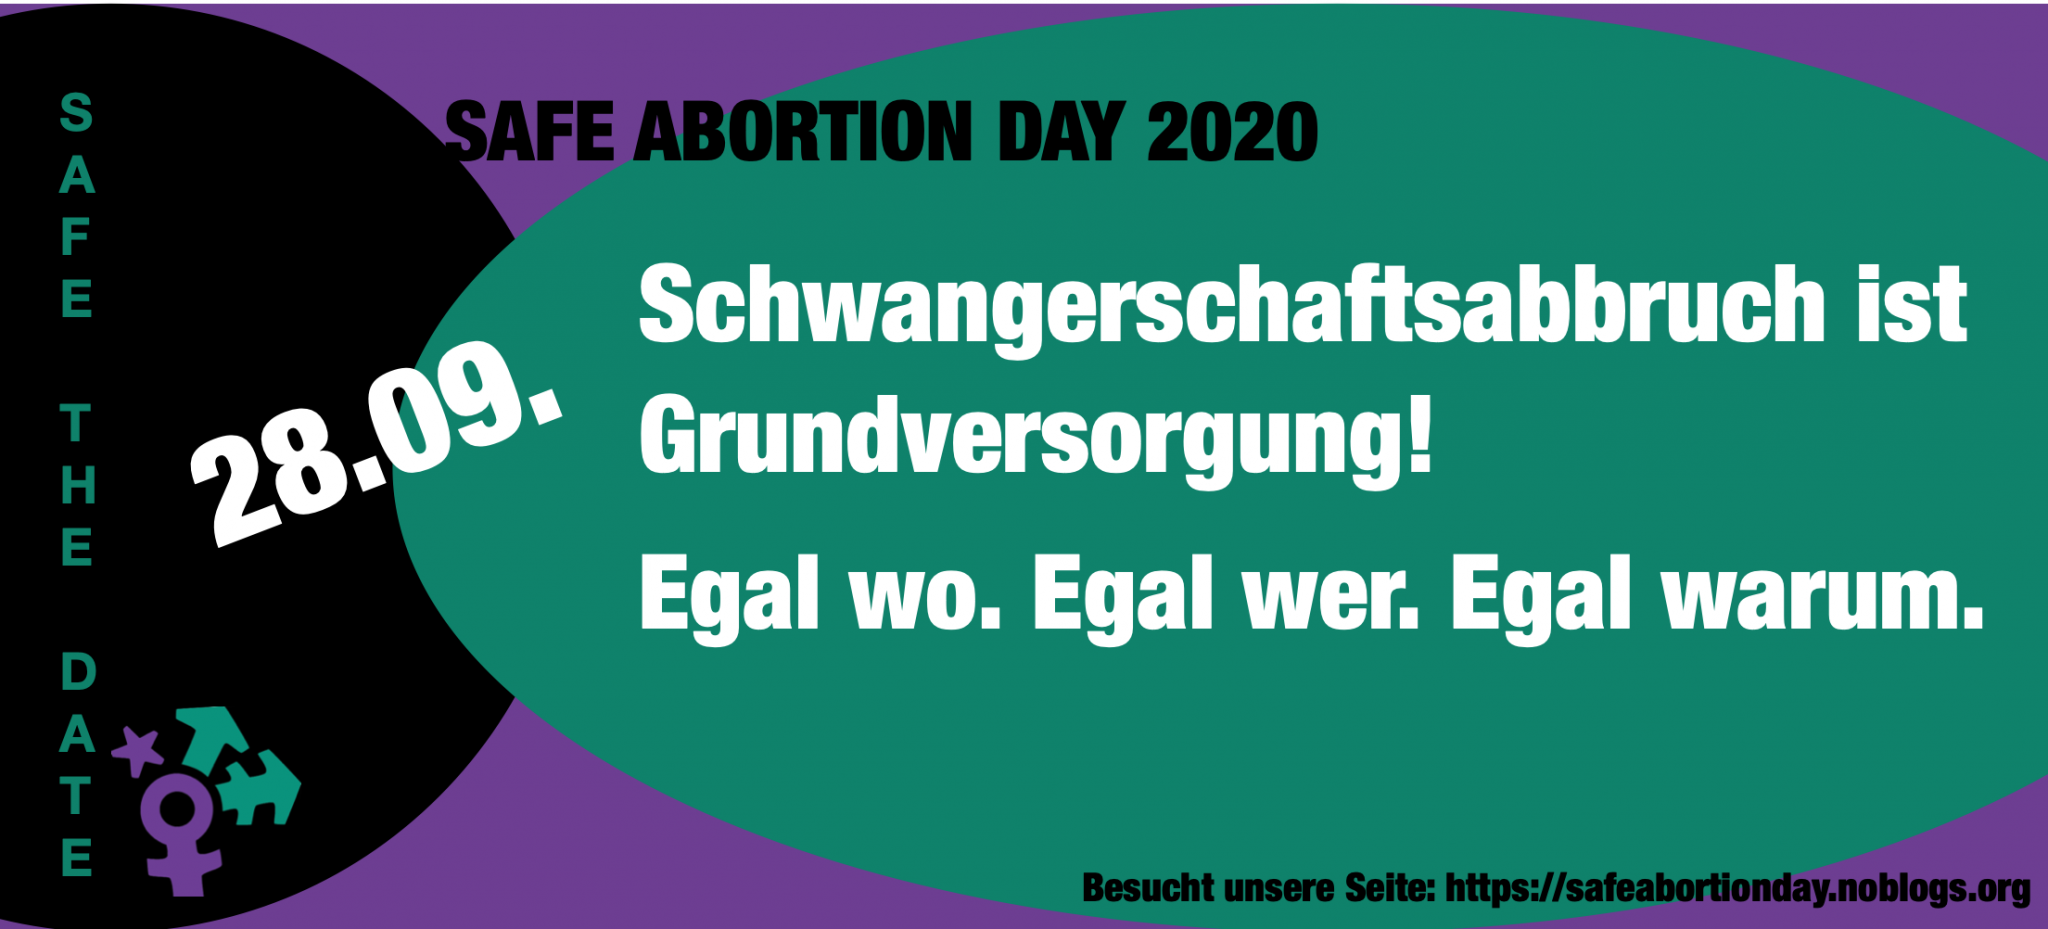 safe abortion day 2020